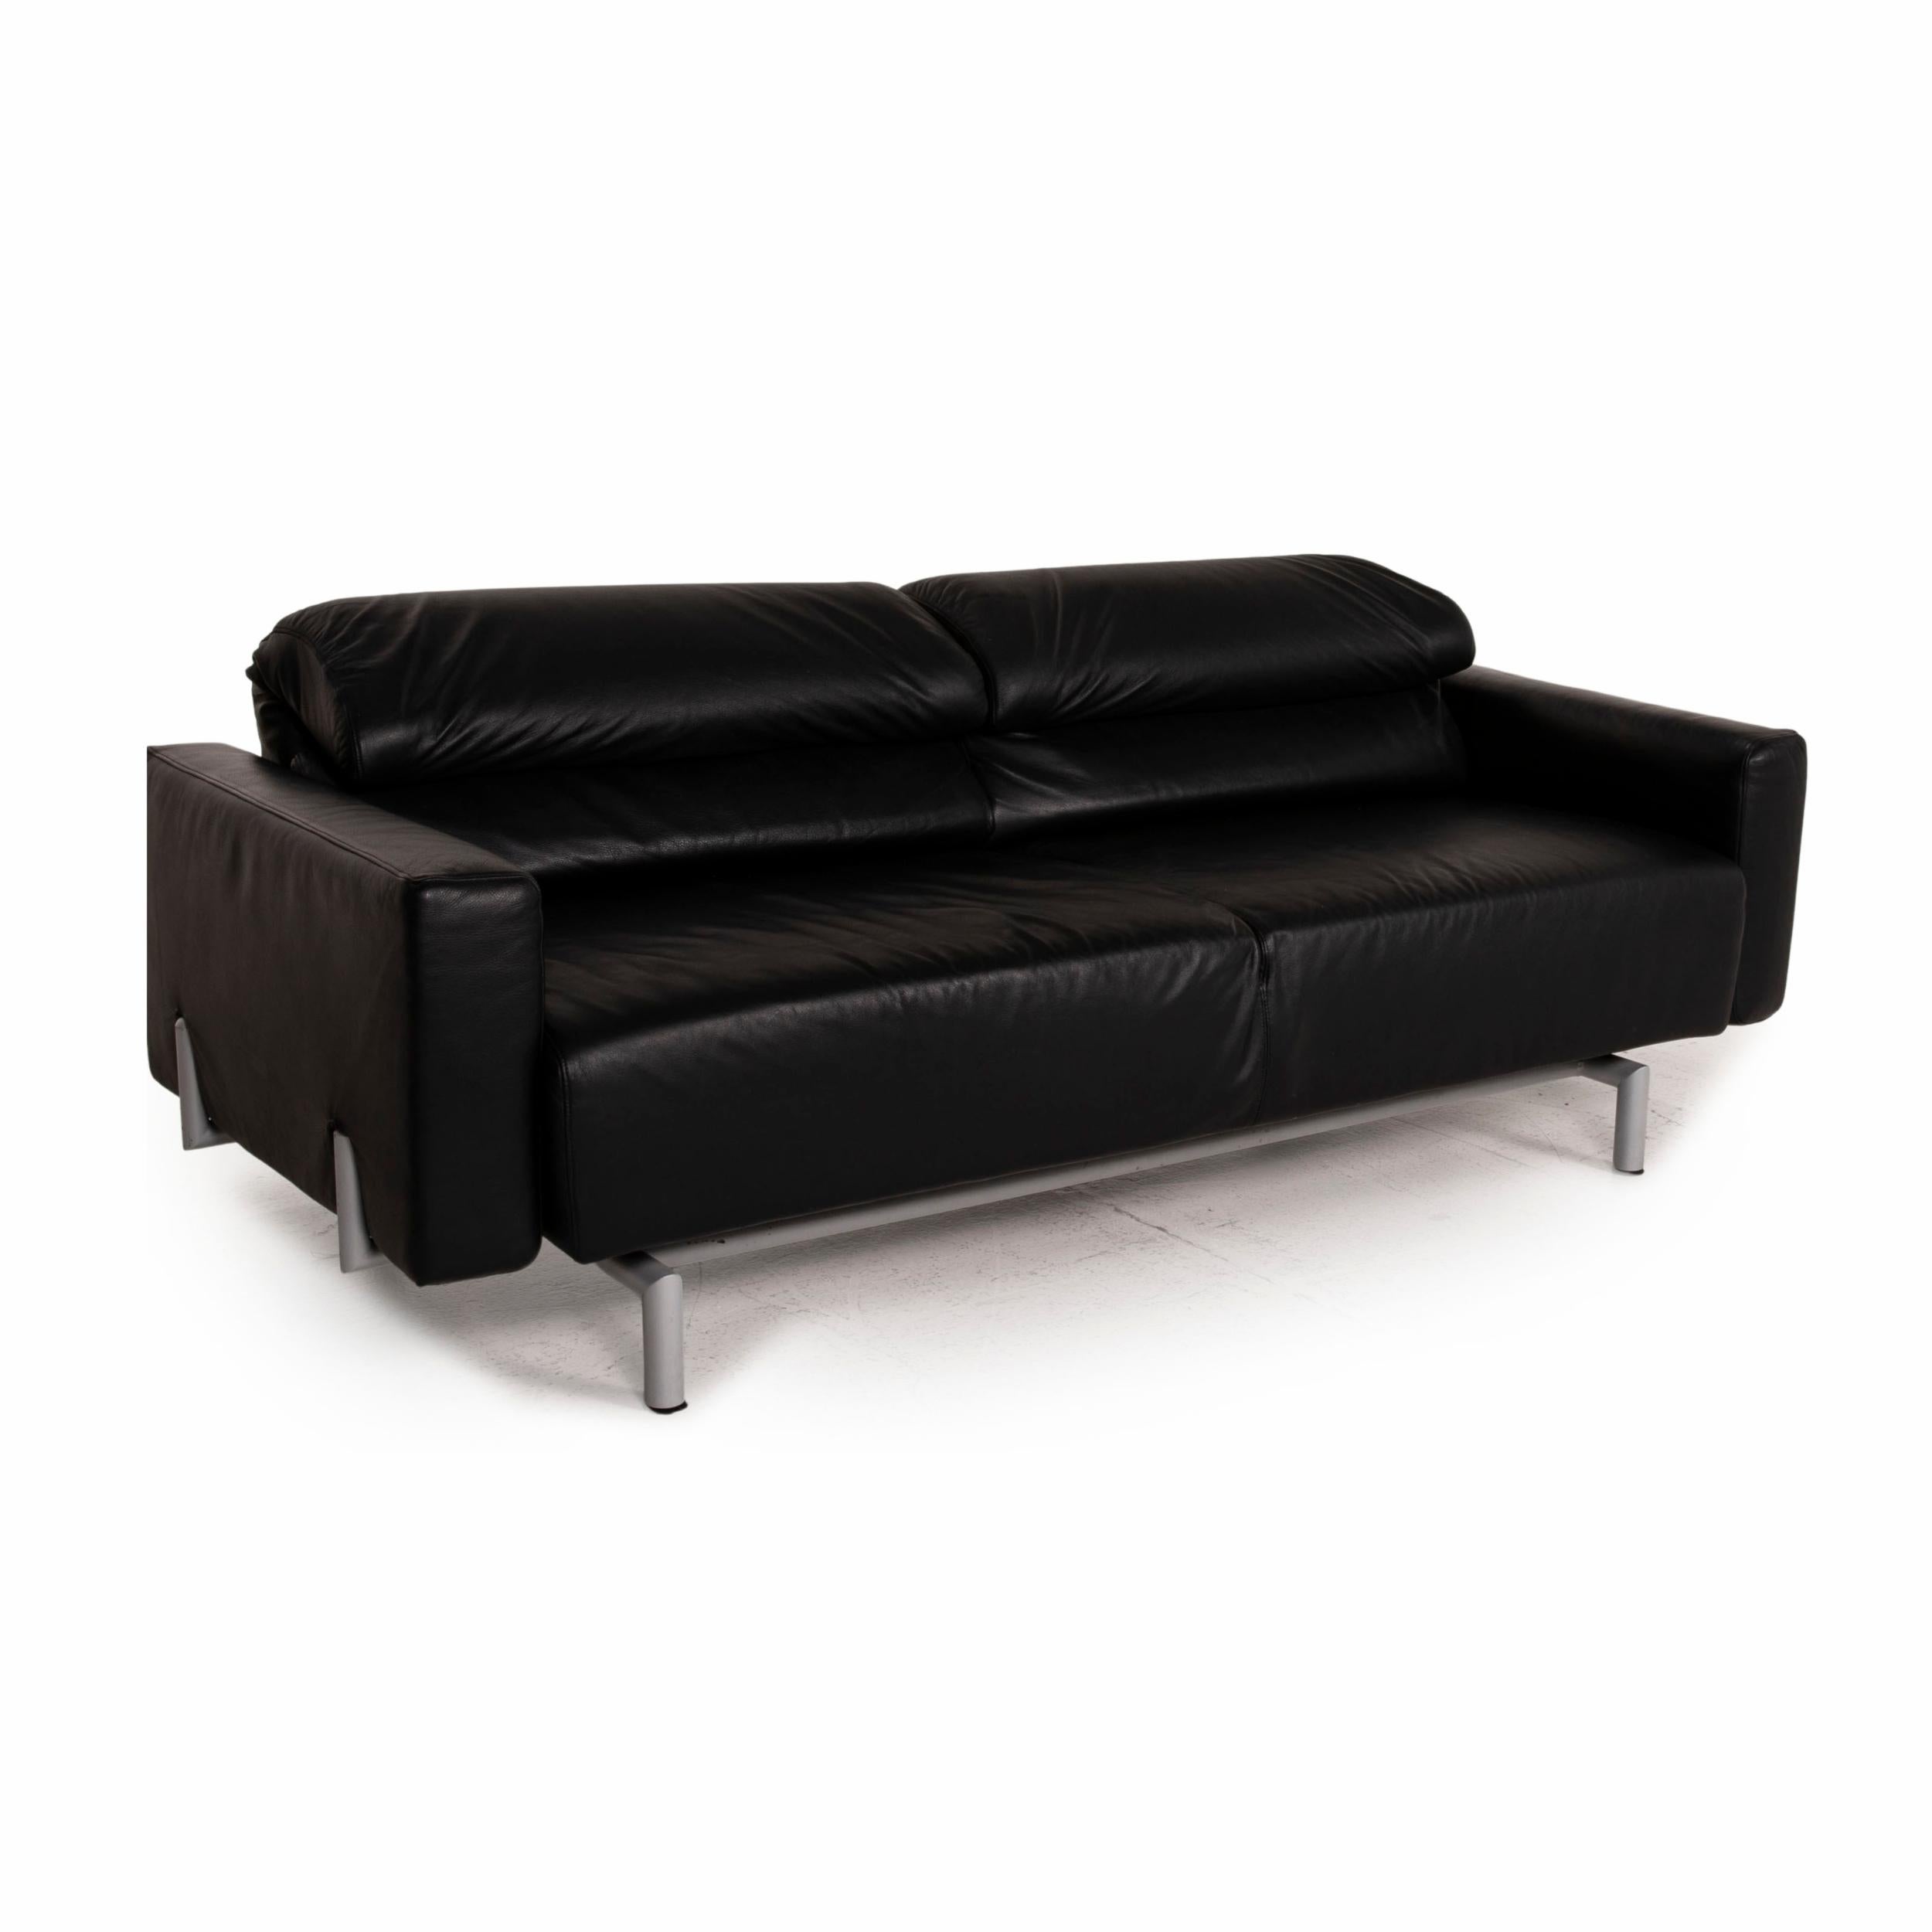 Strässle Matteo Leather Sofa Black Two-Seater Function Relax Function Couch 1